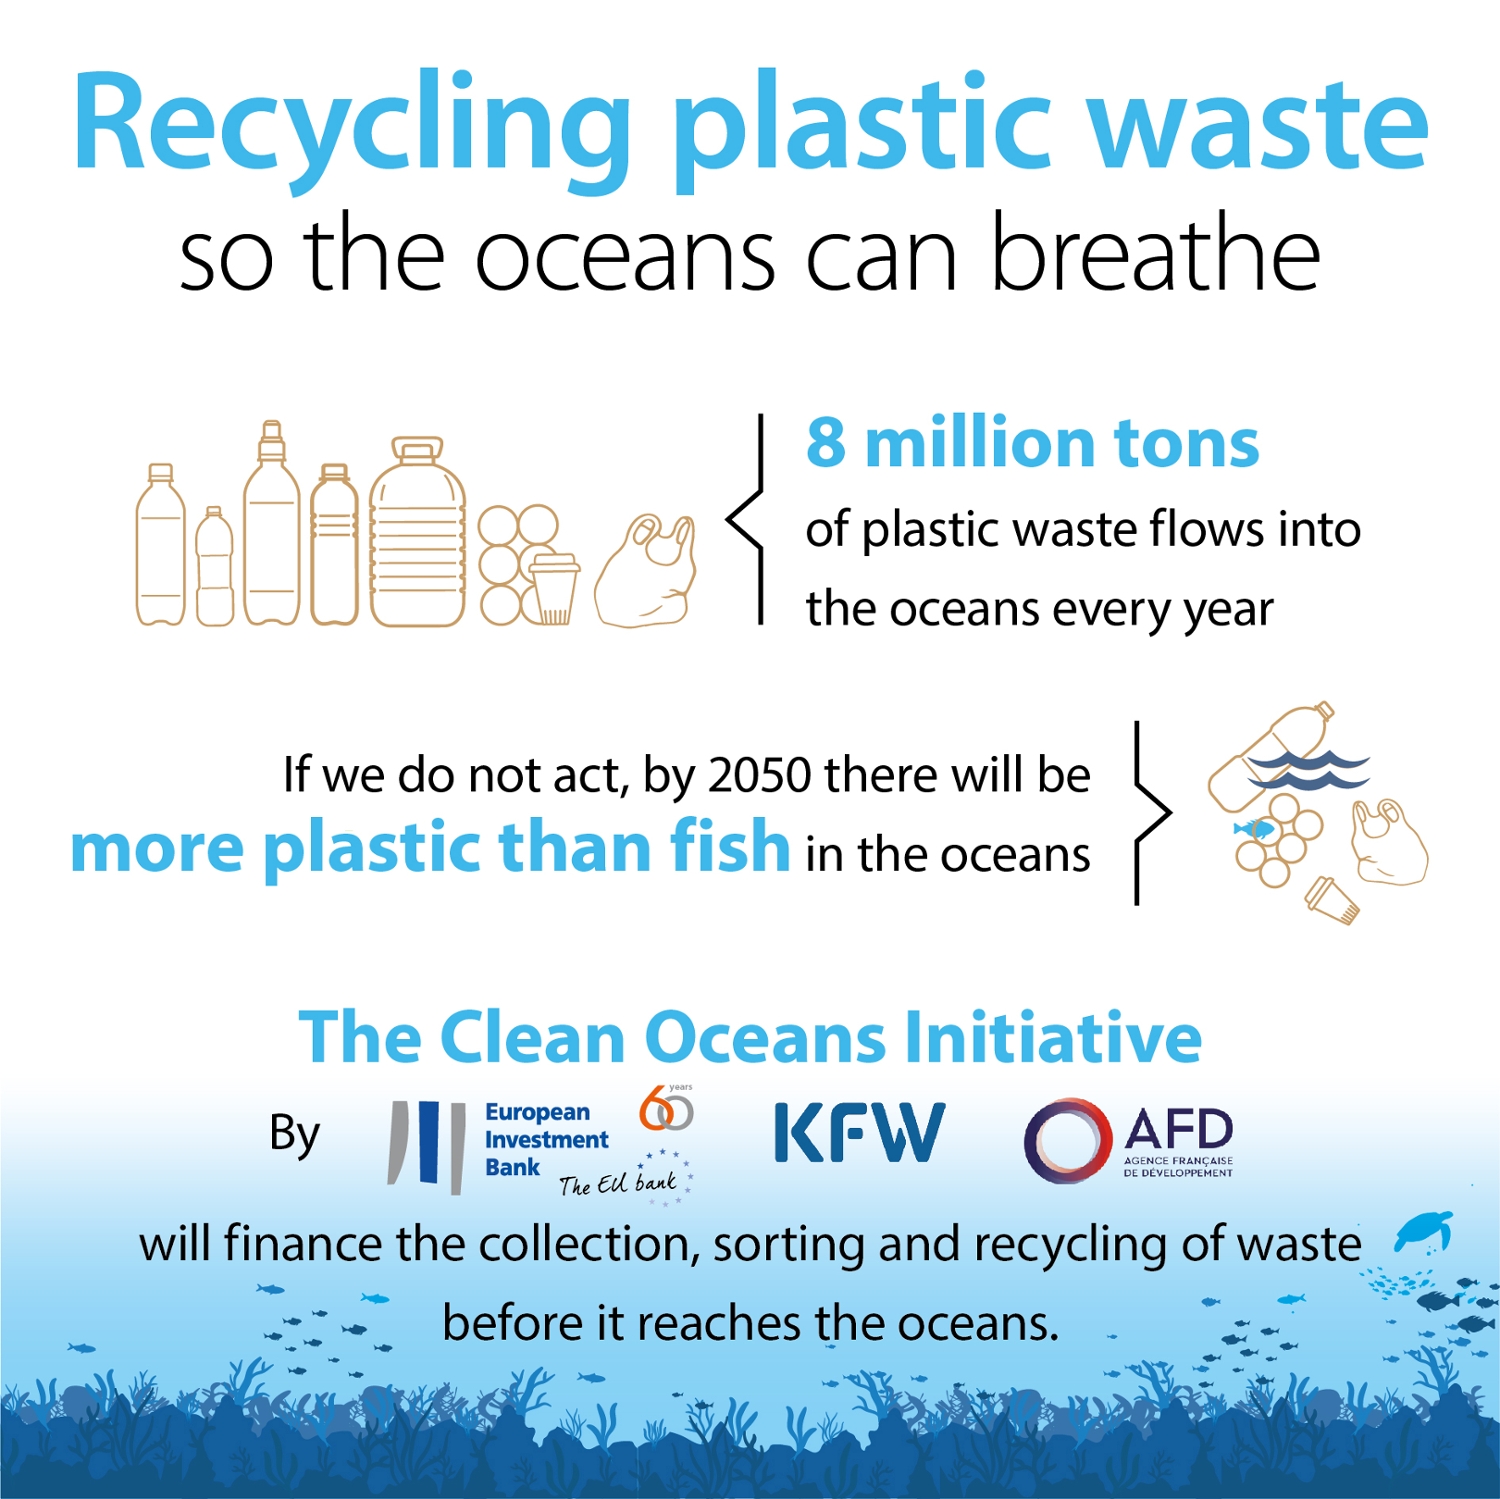 Recycling plastic waste to the ocean can breathe